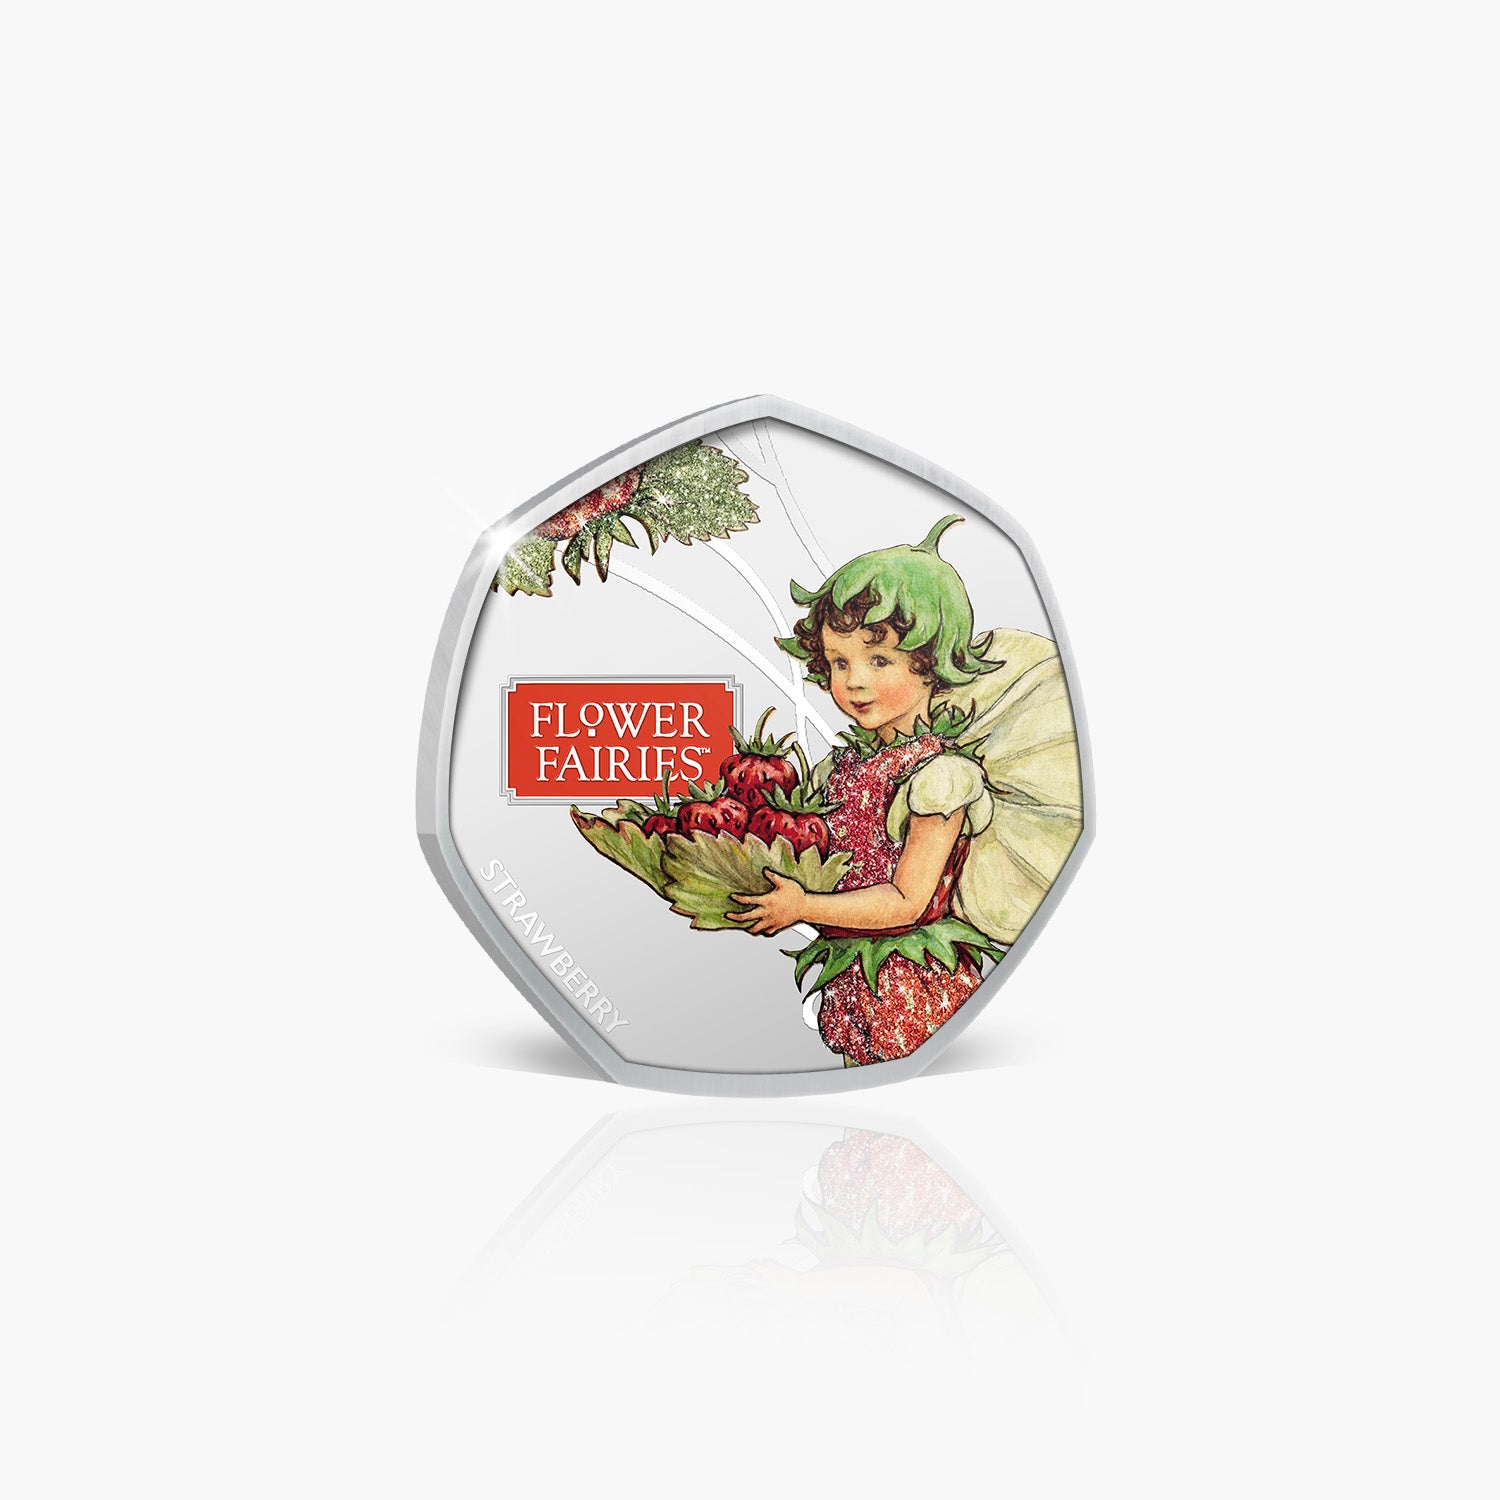 Strawberry Silver Plated Coin